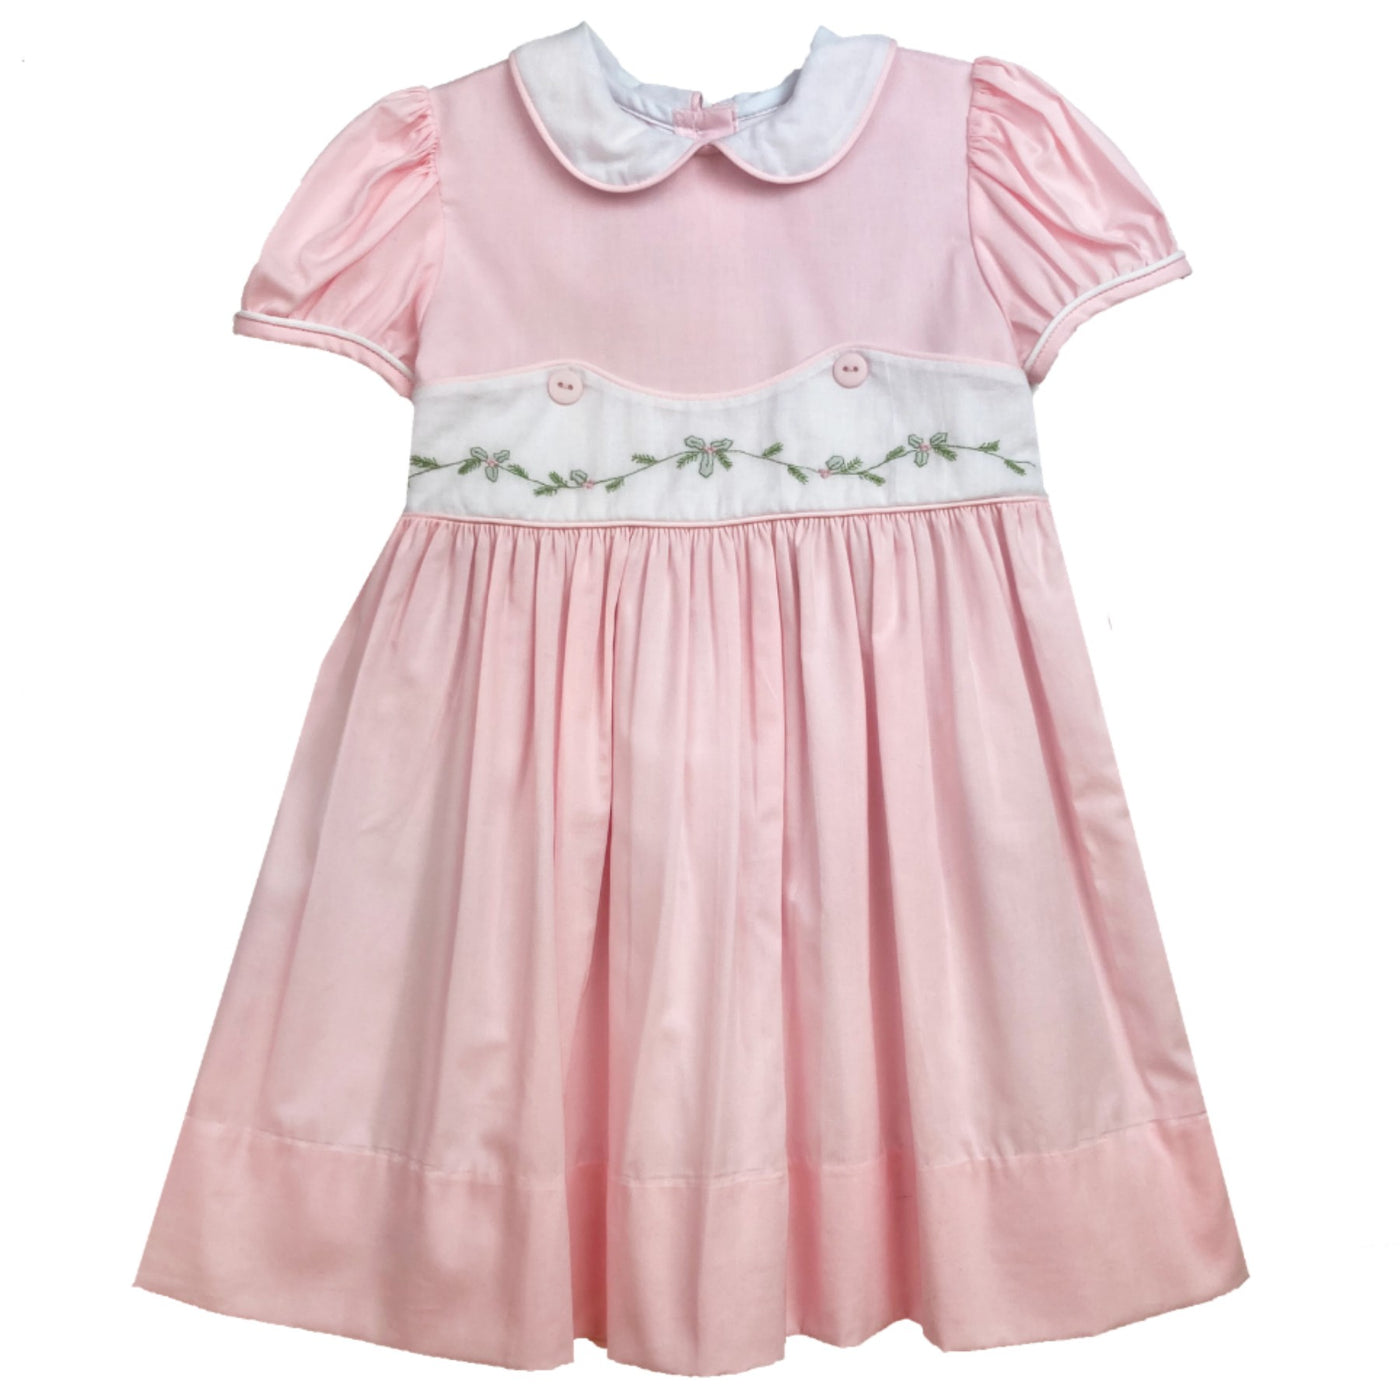 Legacy Dress in Pink/Holly Lullaby Set